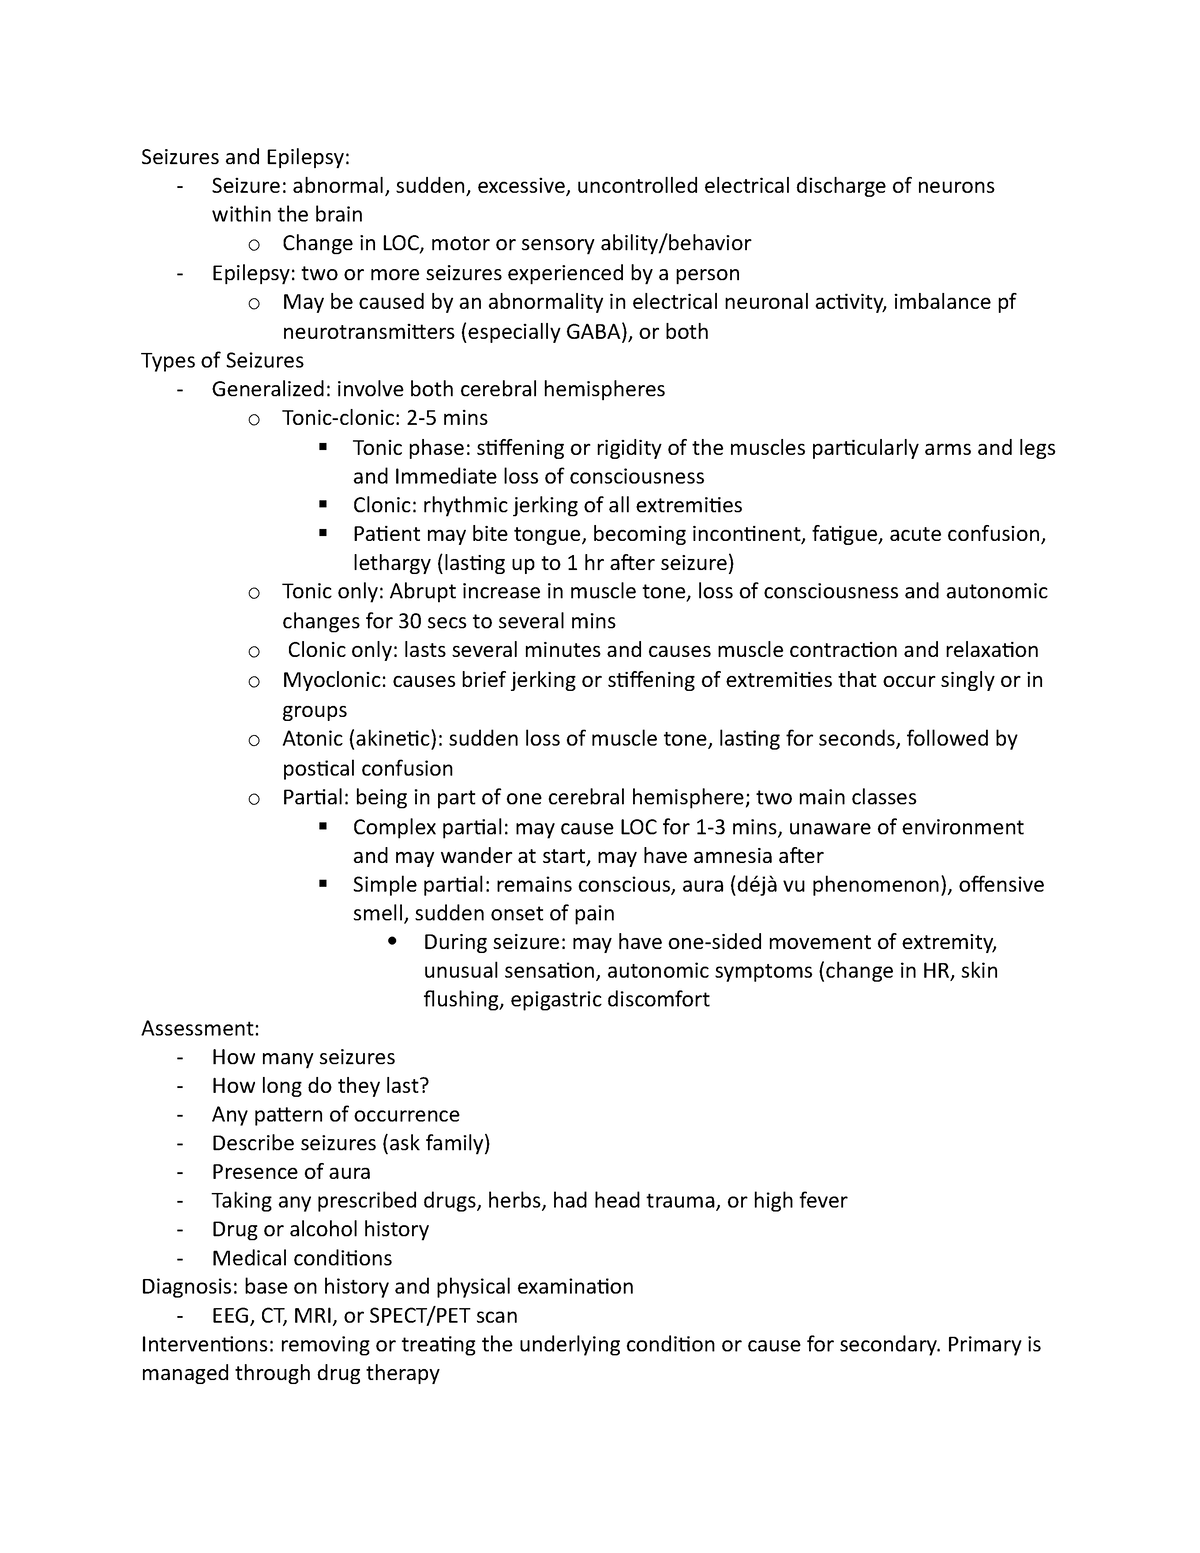 Seizures and Epilepsy Study Guide concept map - Seizures and Epilepsy ...